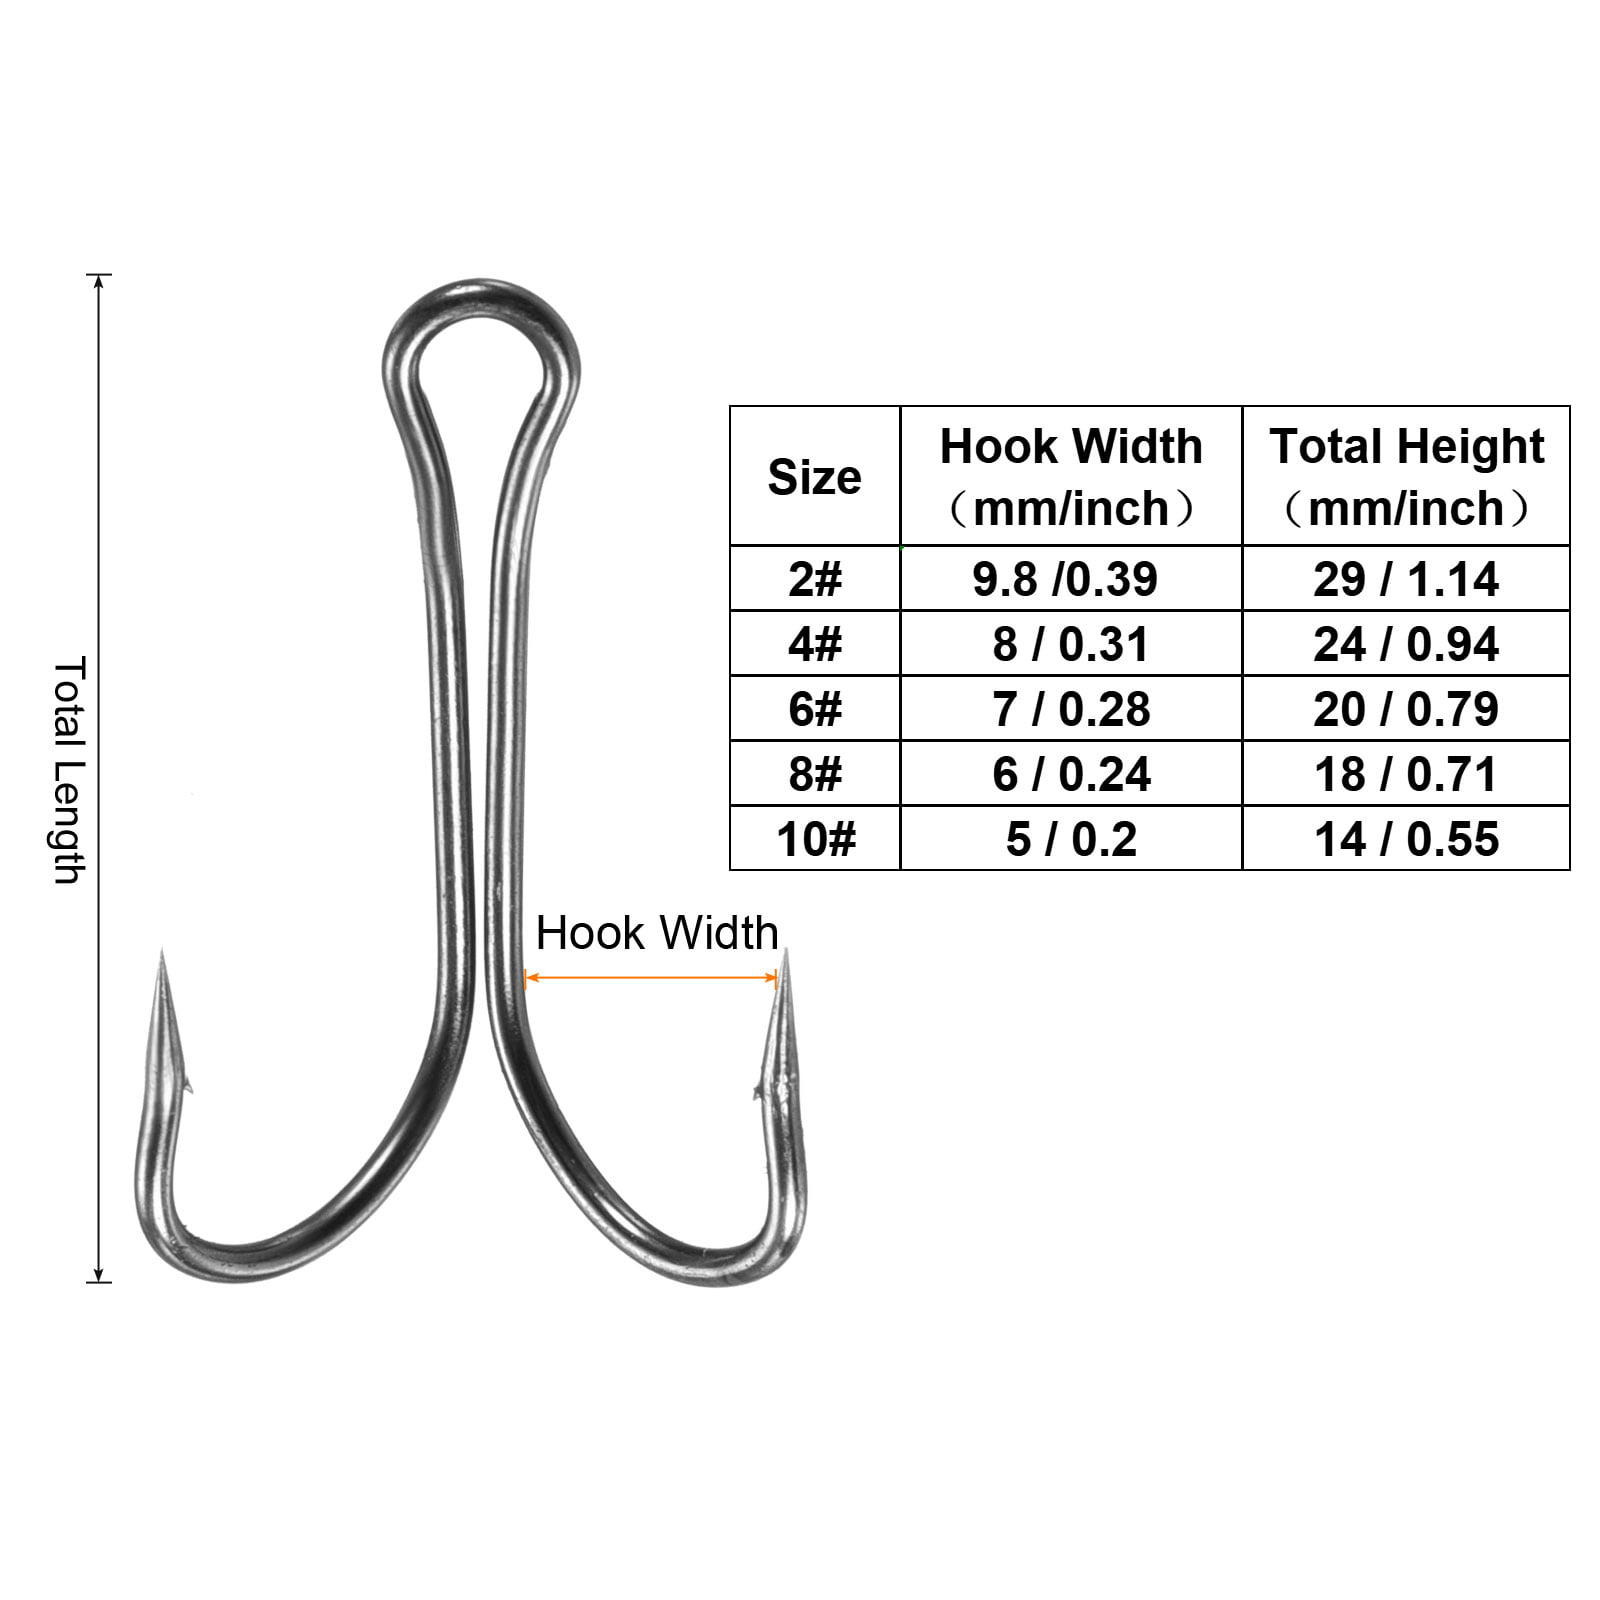 FLAMEEN Fishing Hook,100Pcs 6/0# High-carbon Steel Fish Hooks With Barb  Lure Bait Fishing Tackle,Fish Hook